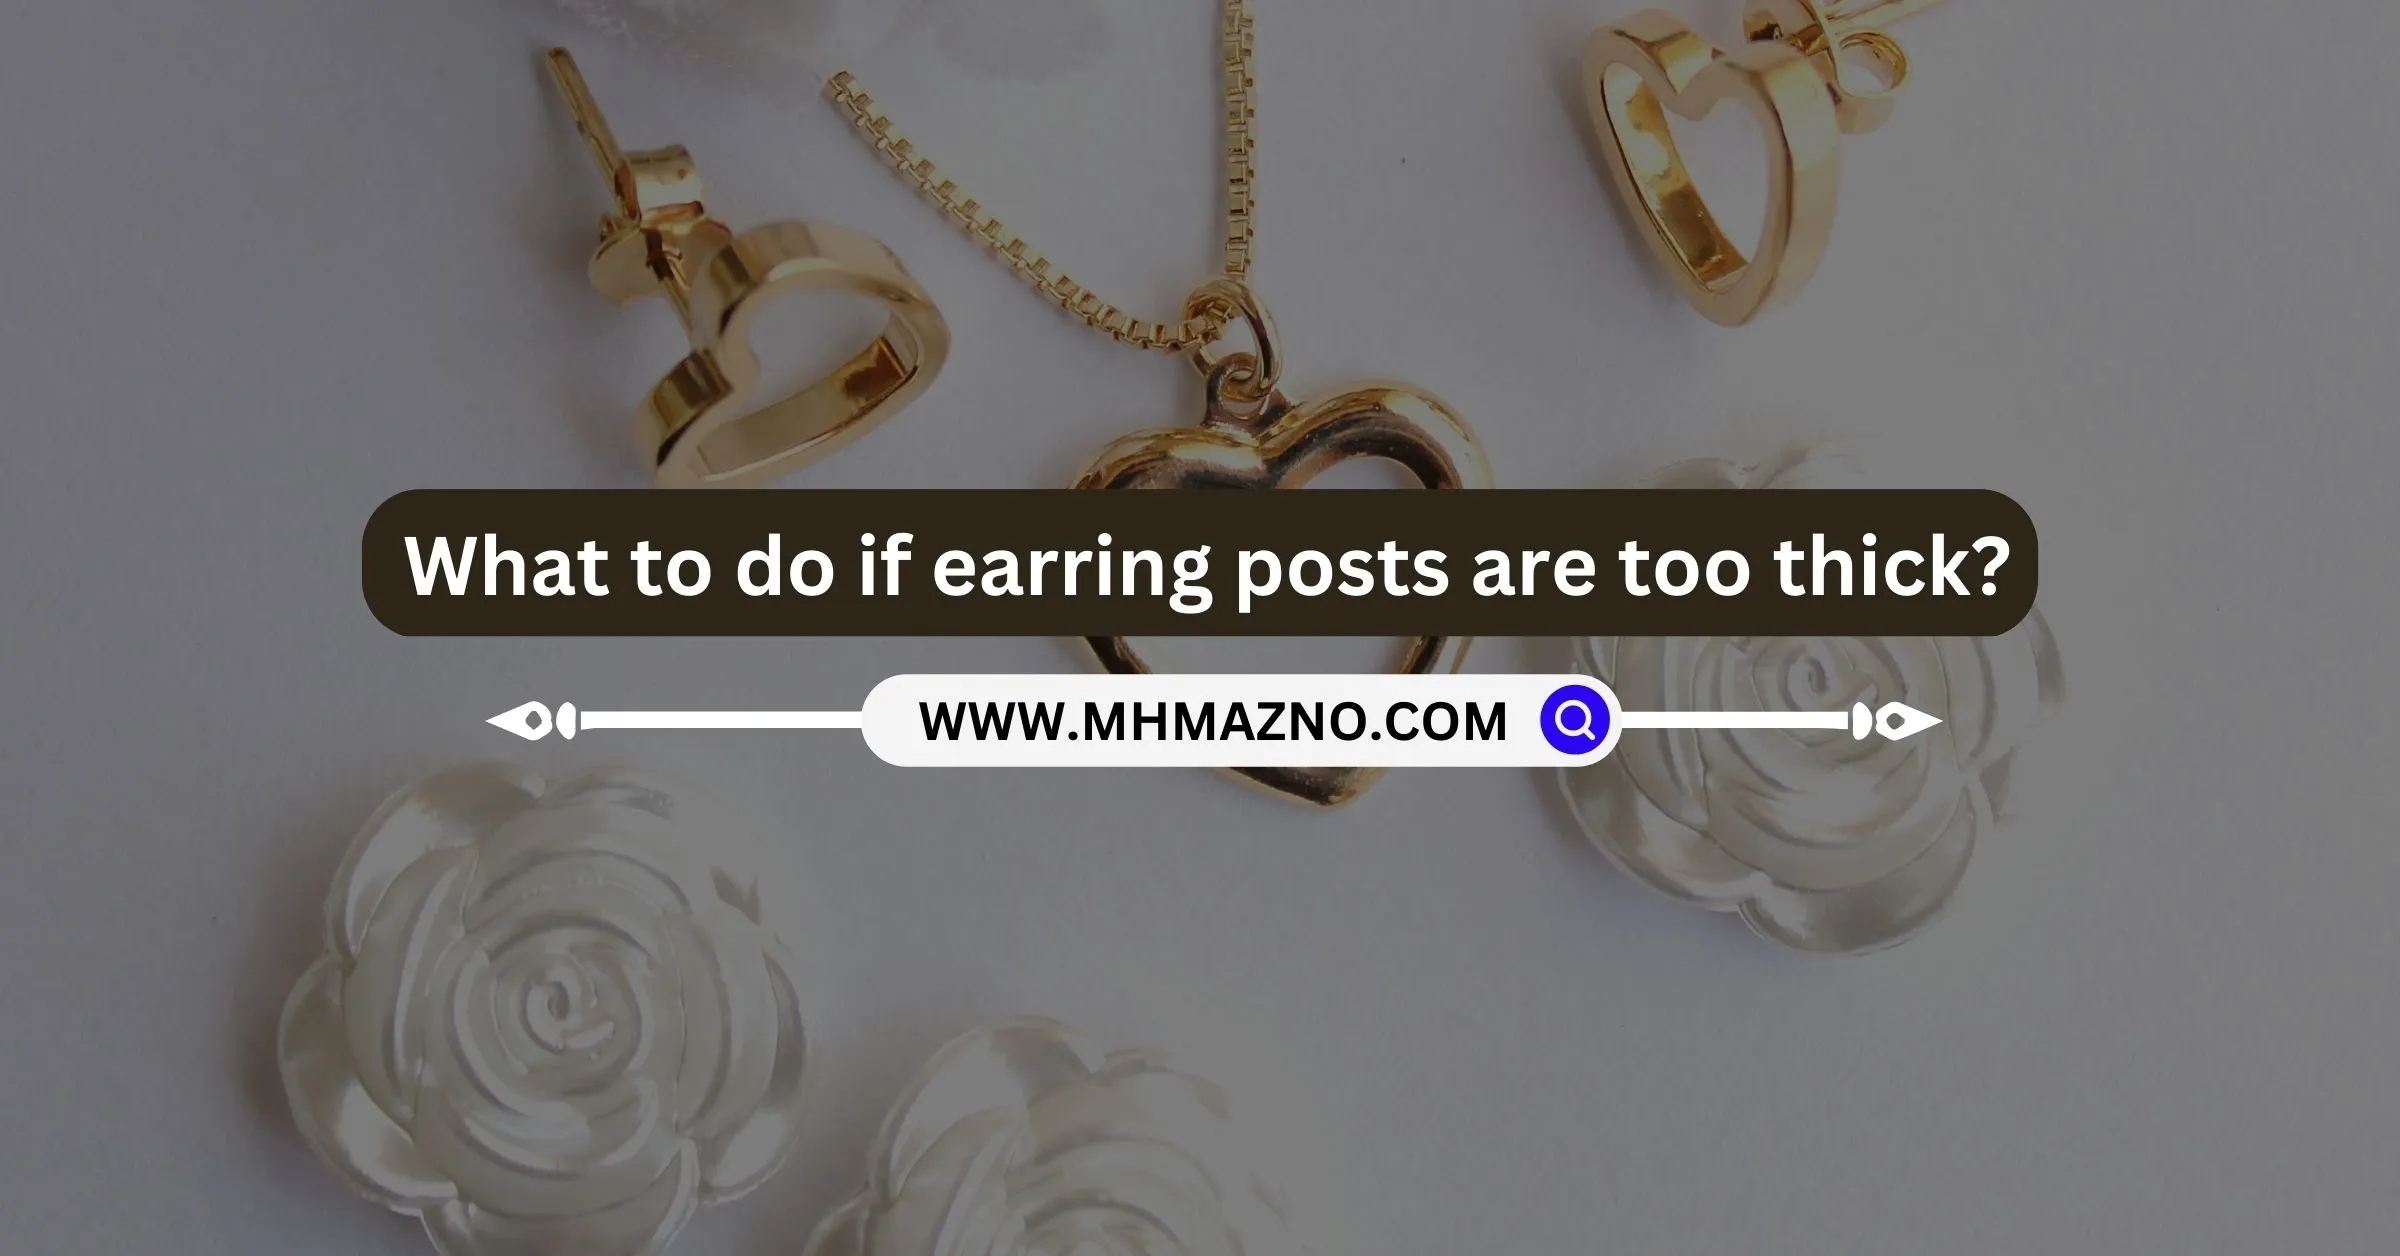 What to do if earring posts are too thick